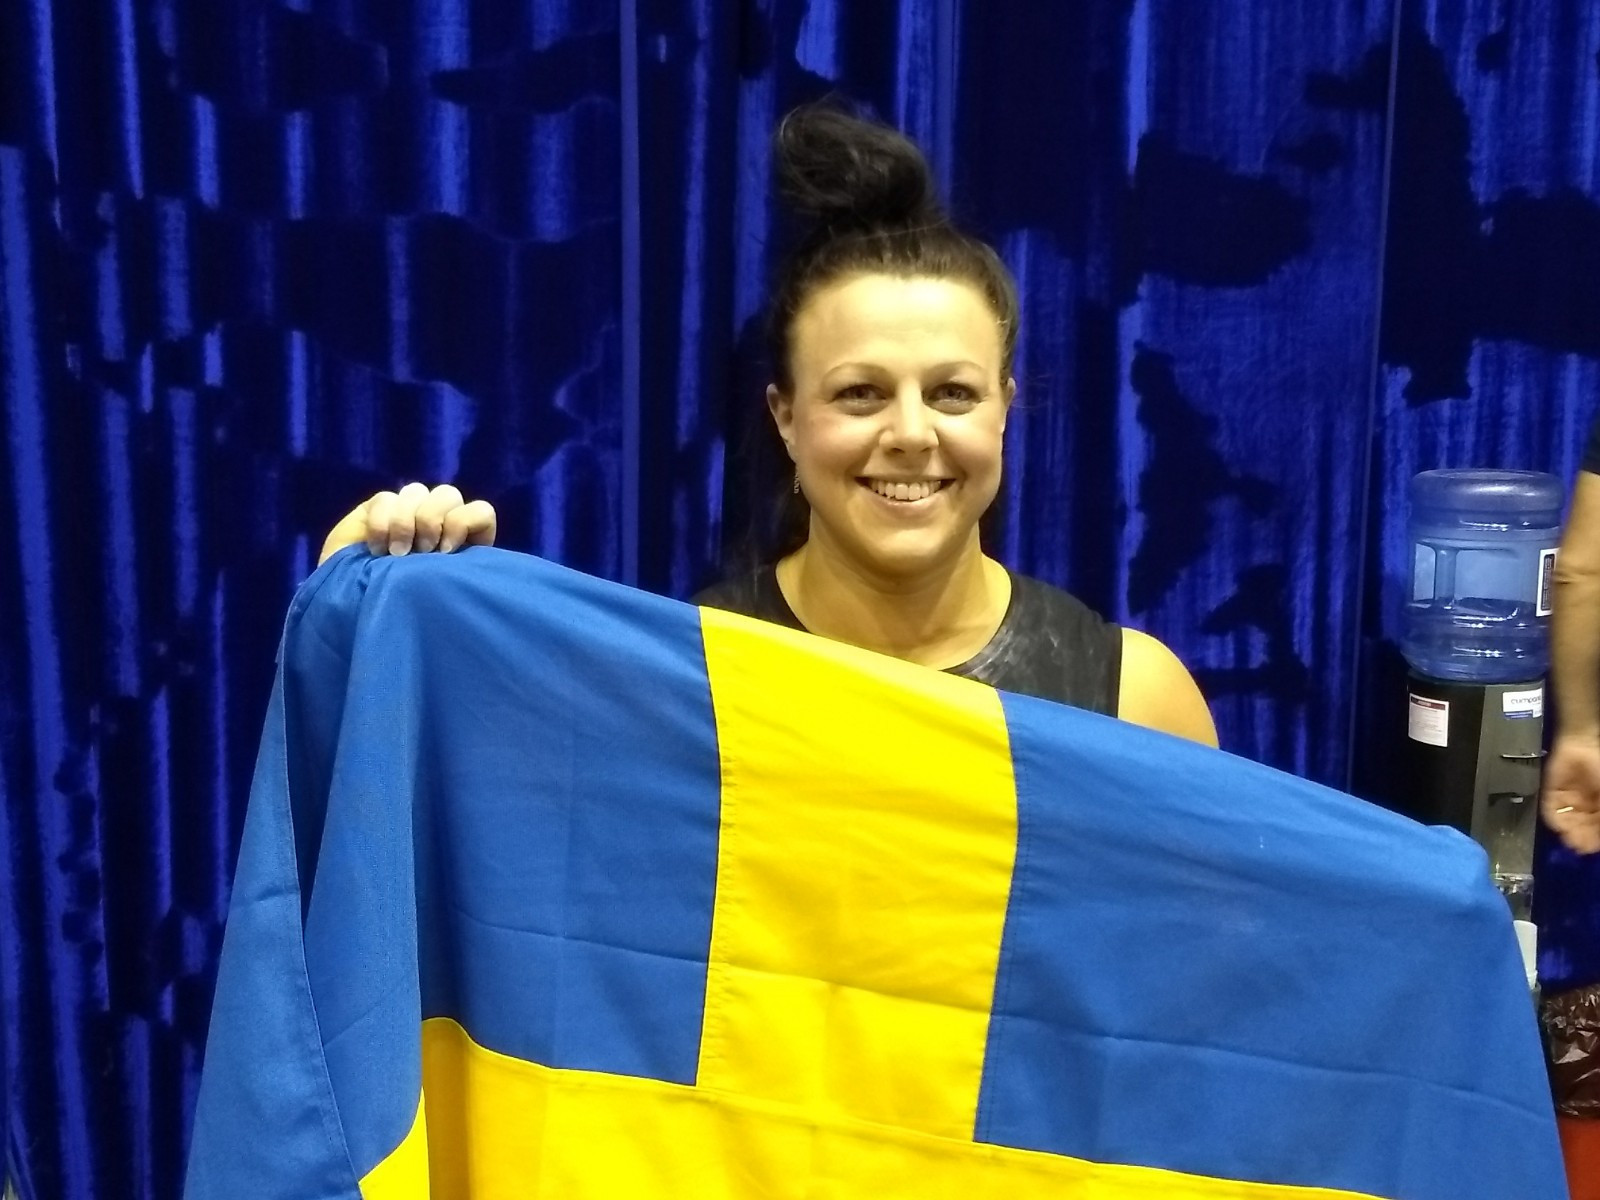 Strenius is first Swedish woman - and first CrossFit weightlifter - to win European gold